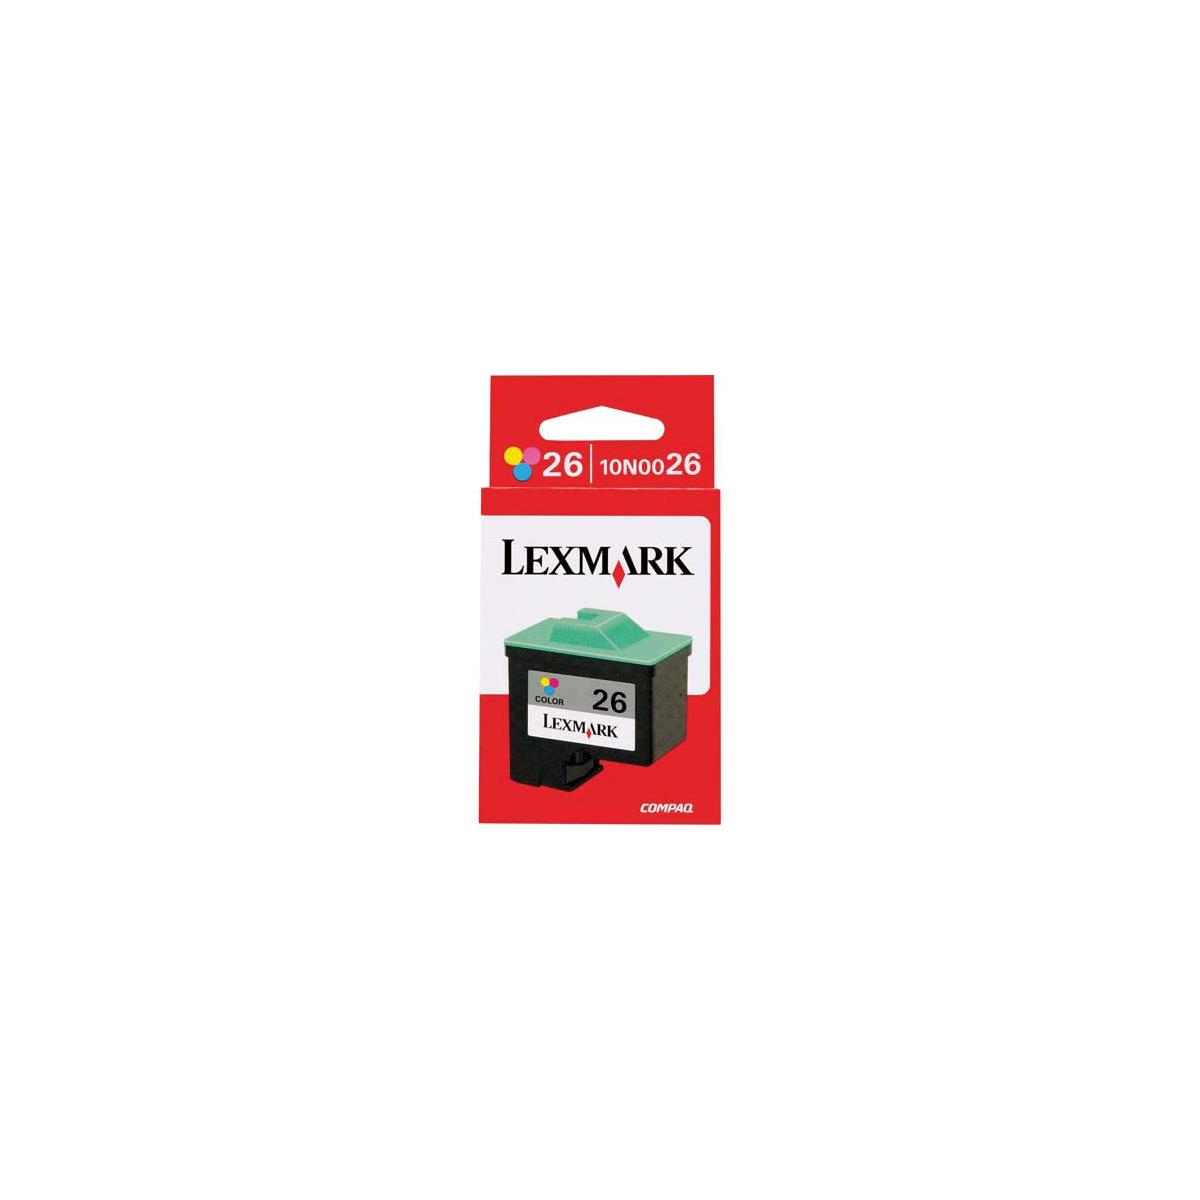 Lexmark 10N0026 Color Print Inkjet Cartridge # 26 #26 Color Print Cartridge  Genuine Lexmark cartridges generate optimum print quality using fade-resistant, concentrated dye based inks with small ink drop size for vibrant color, clarity and detail for brilliant photos and sharp images. Approximate Yield: 275 Pages